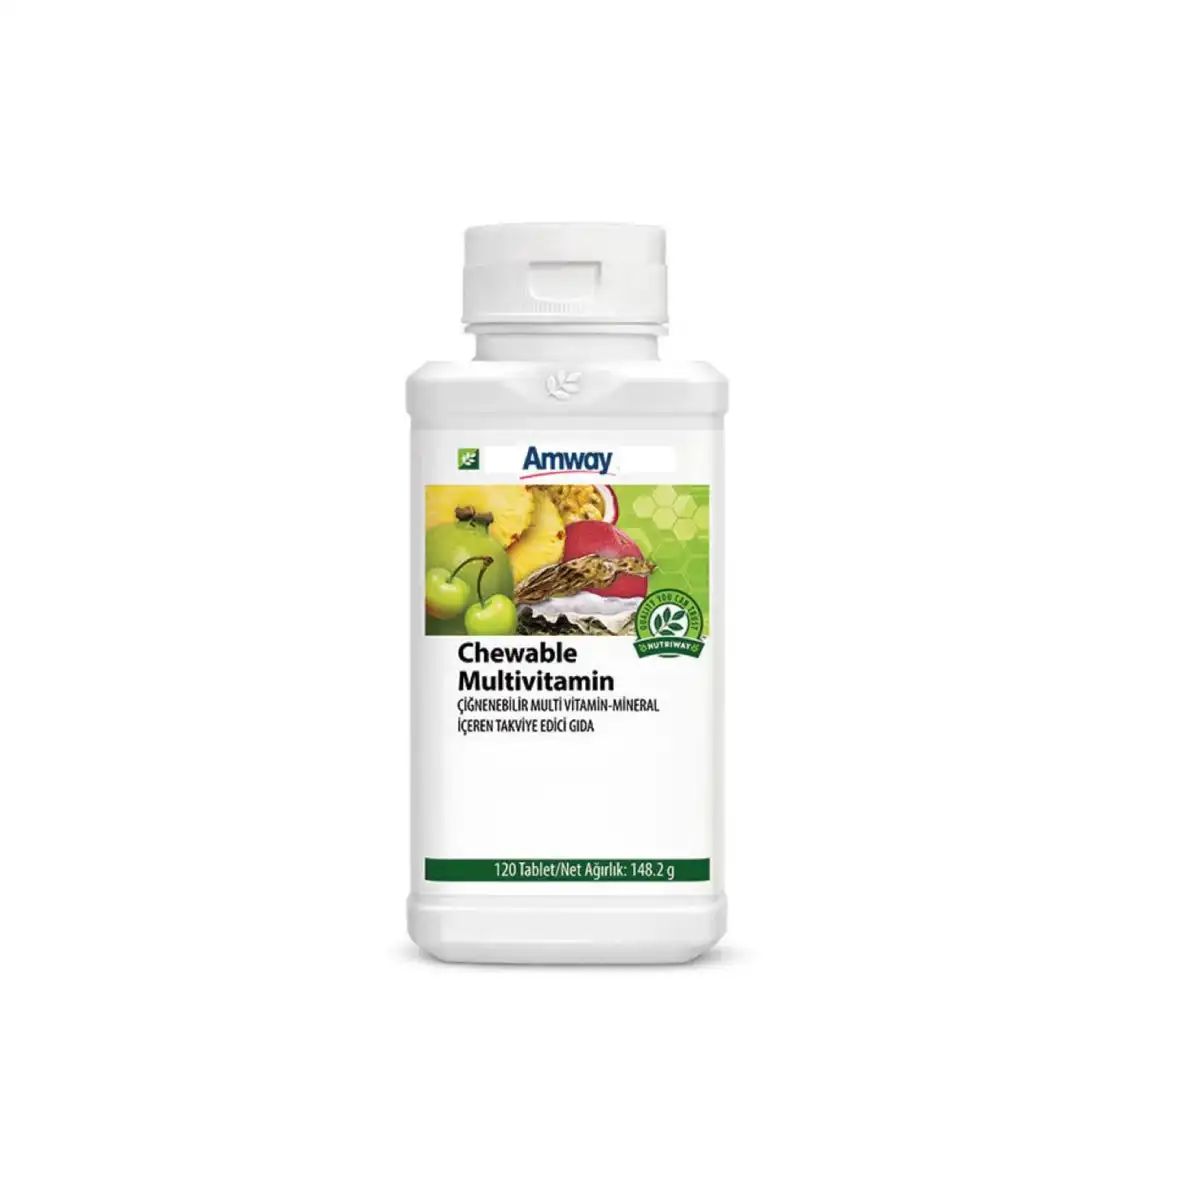 Amway Nutriway Chewable Multivitamin